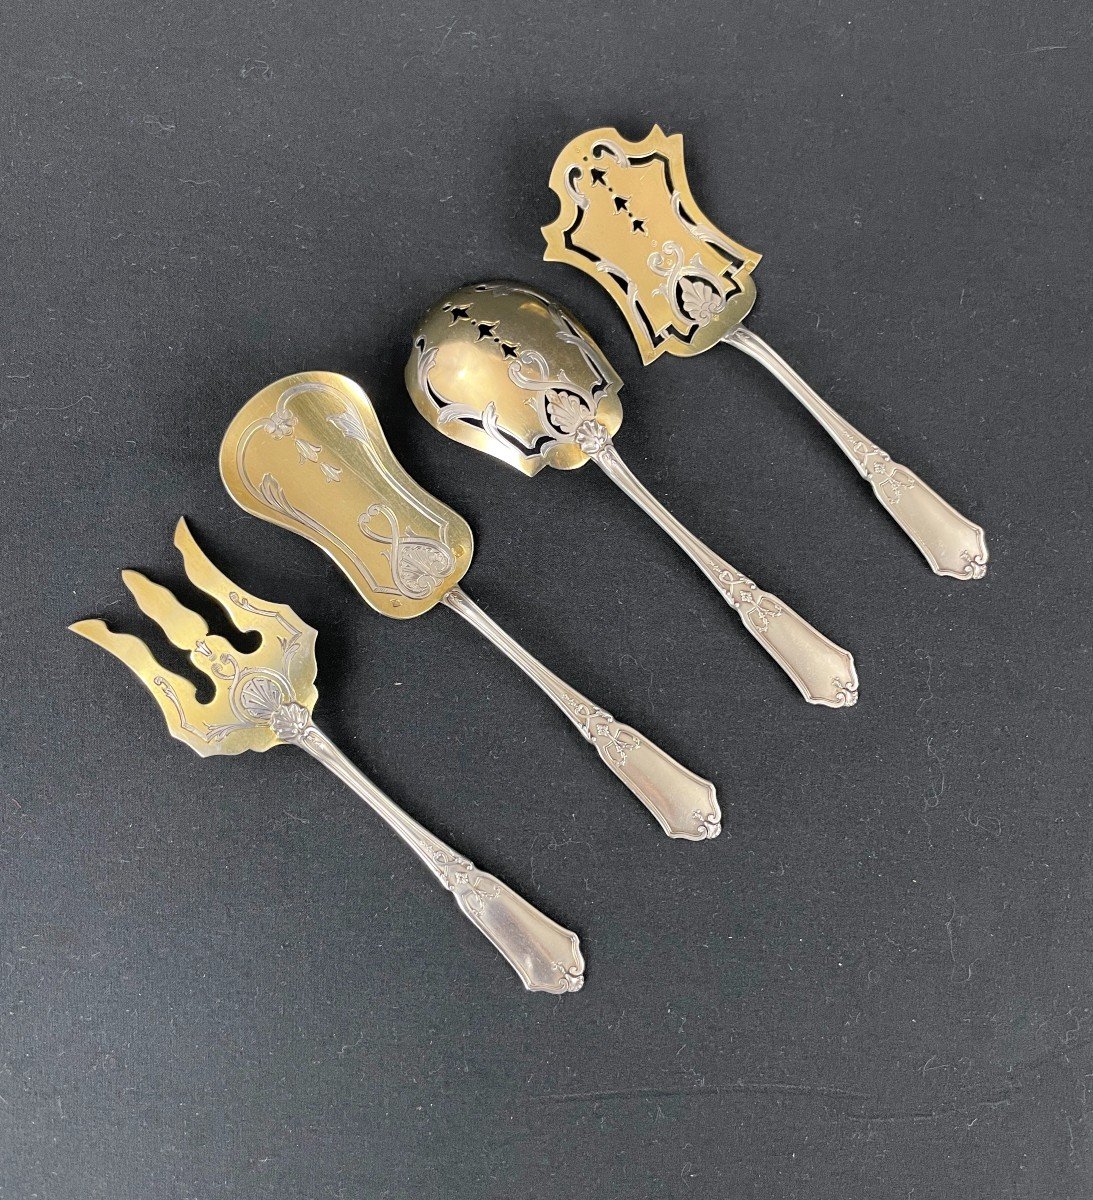 Openwork Service Or Cutlery For Hors d'Oeuvres Or Mignardises In Vermeil And Silver